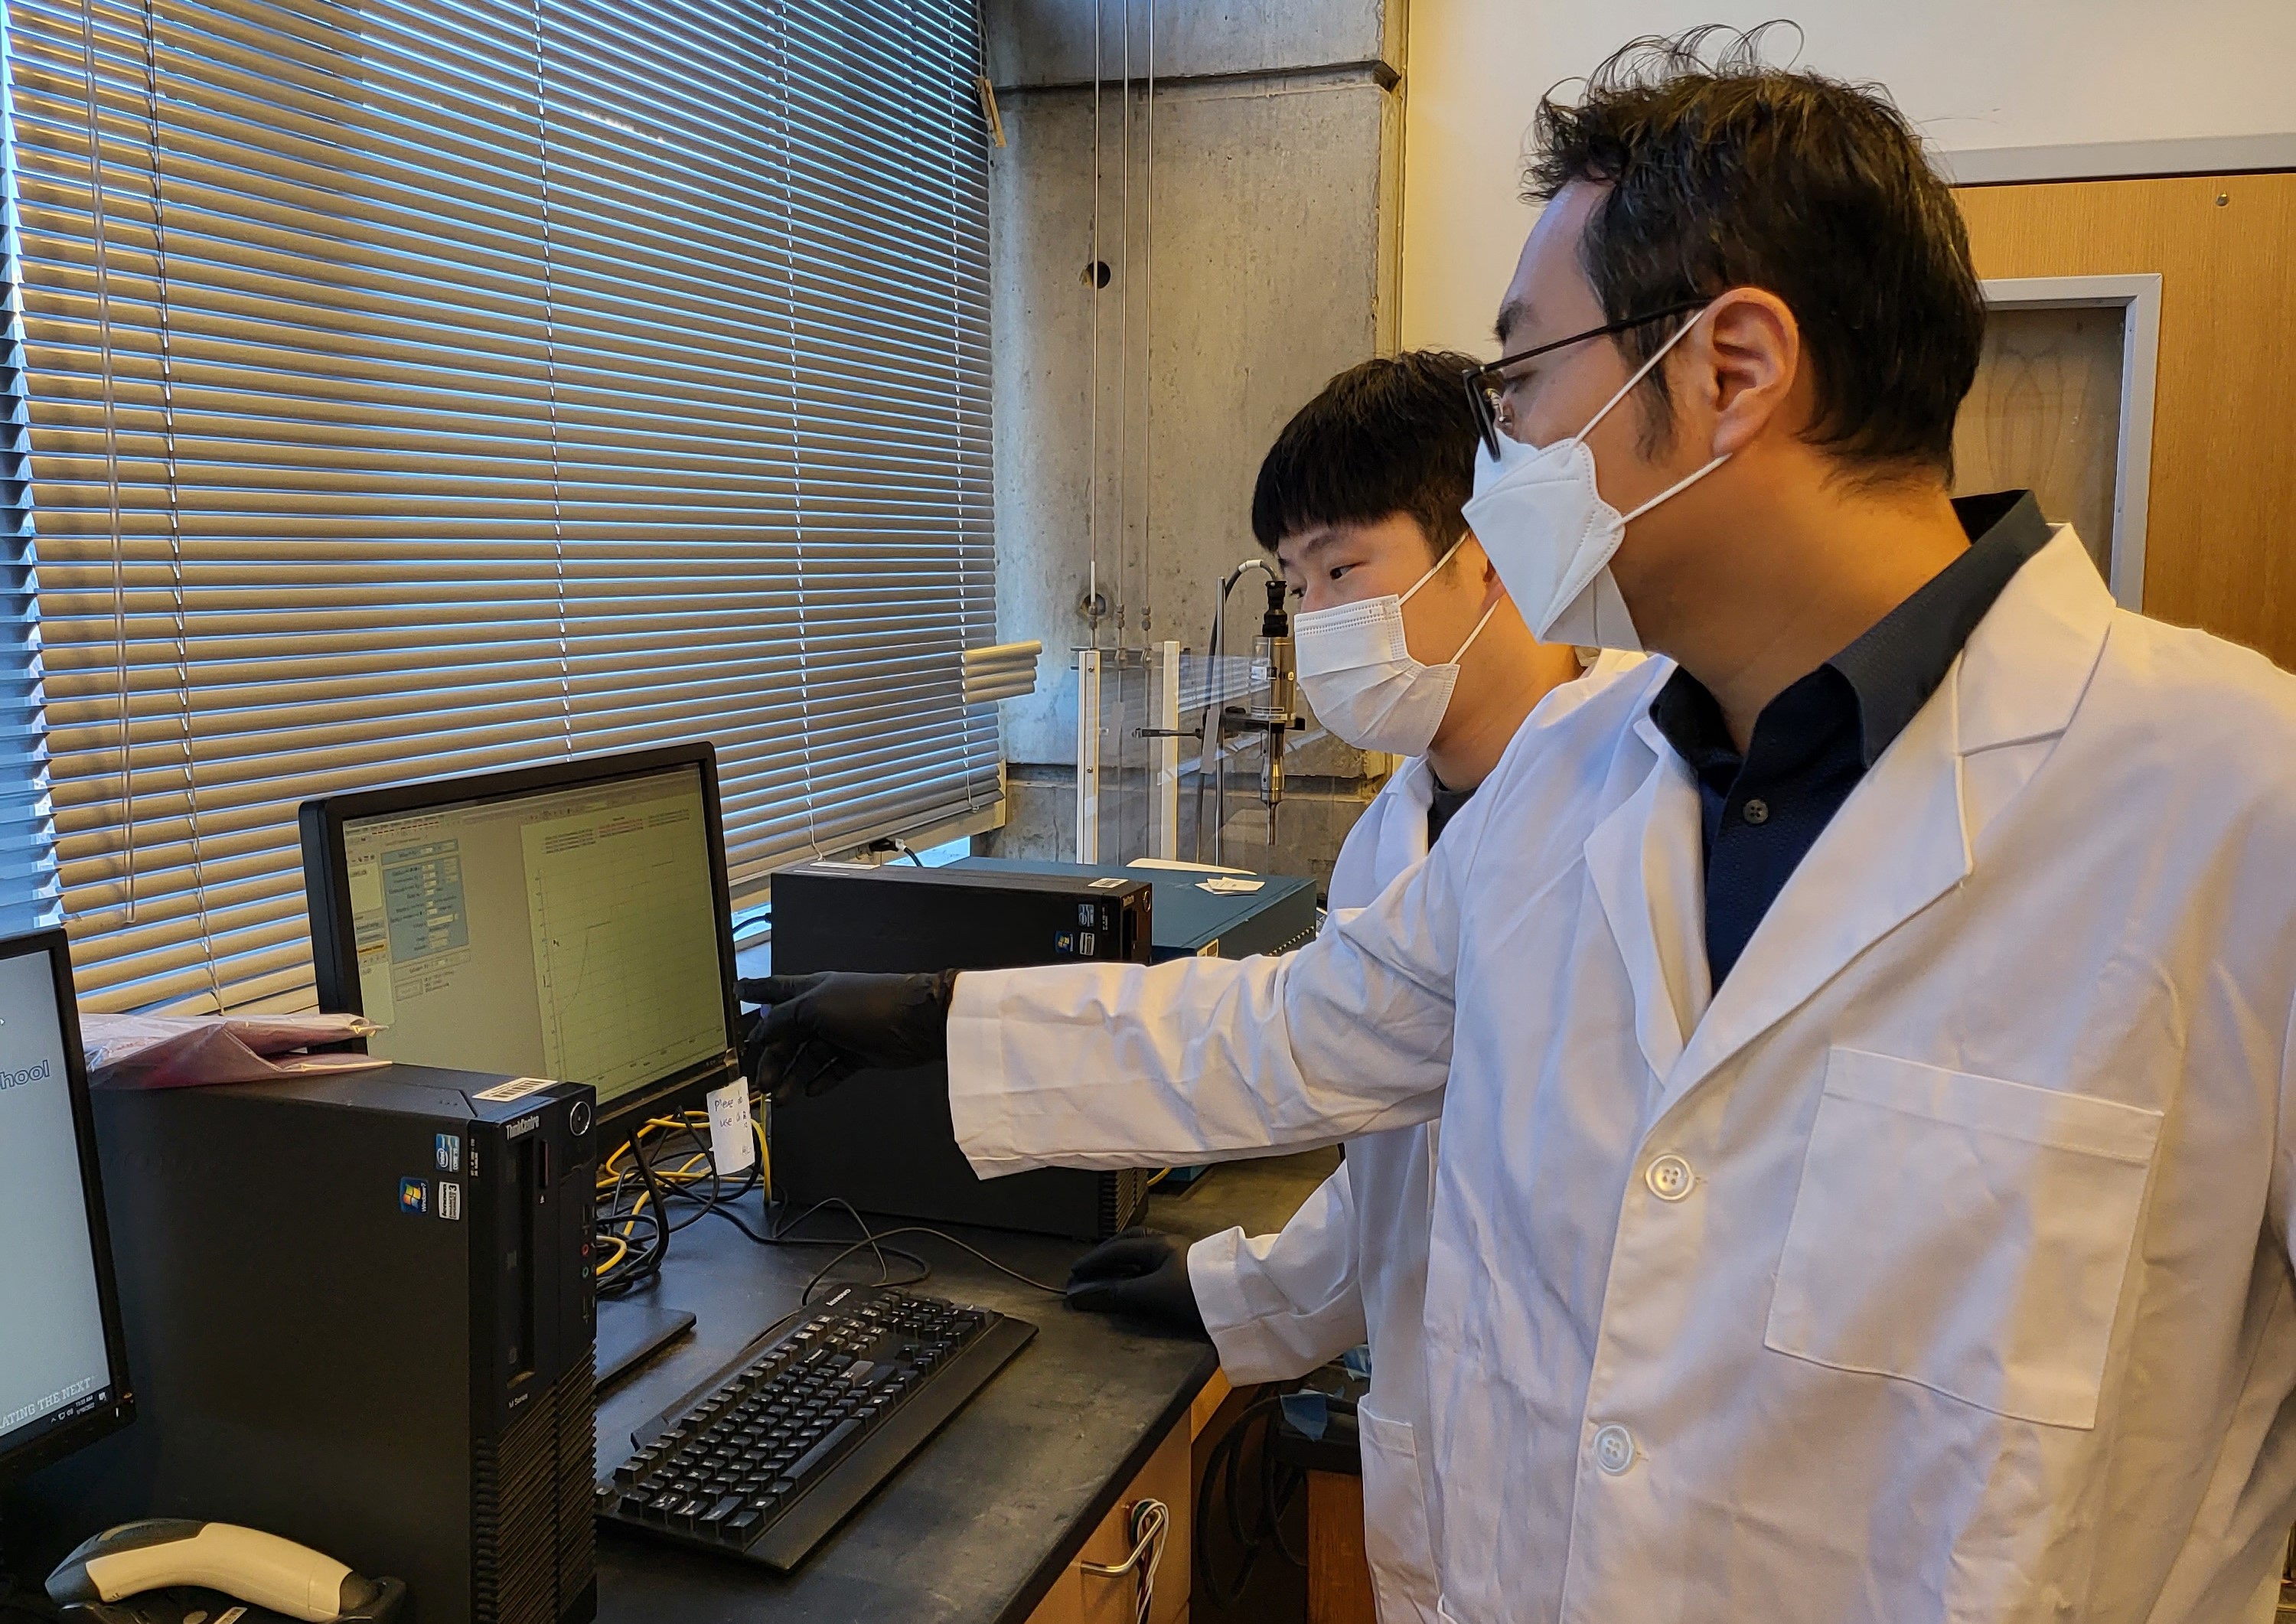 Prof. Seung Woo Lee (right) and Michael J. Lee (left) have charged the rubber-material-based all-solid-state battery using galvanostatic techniques. (Photo credit: Georgia Tech)